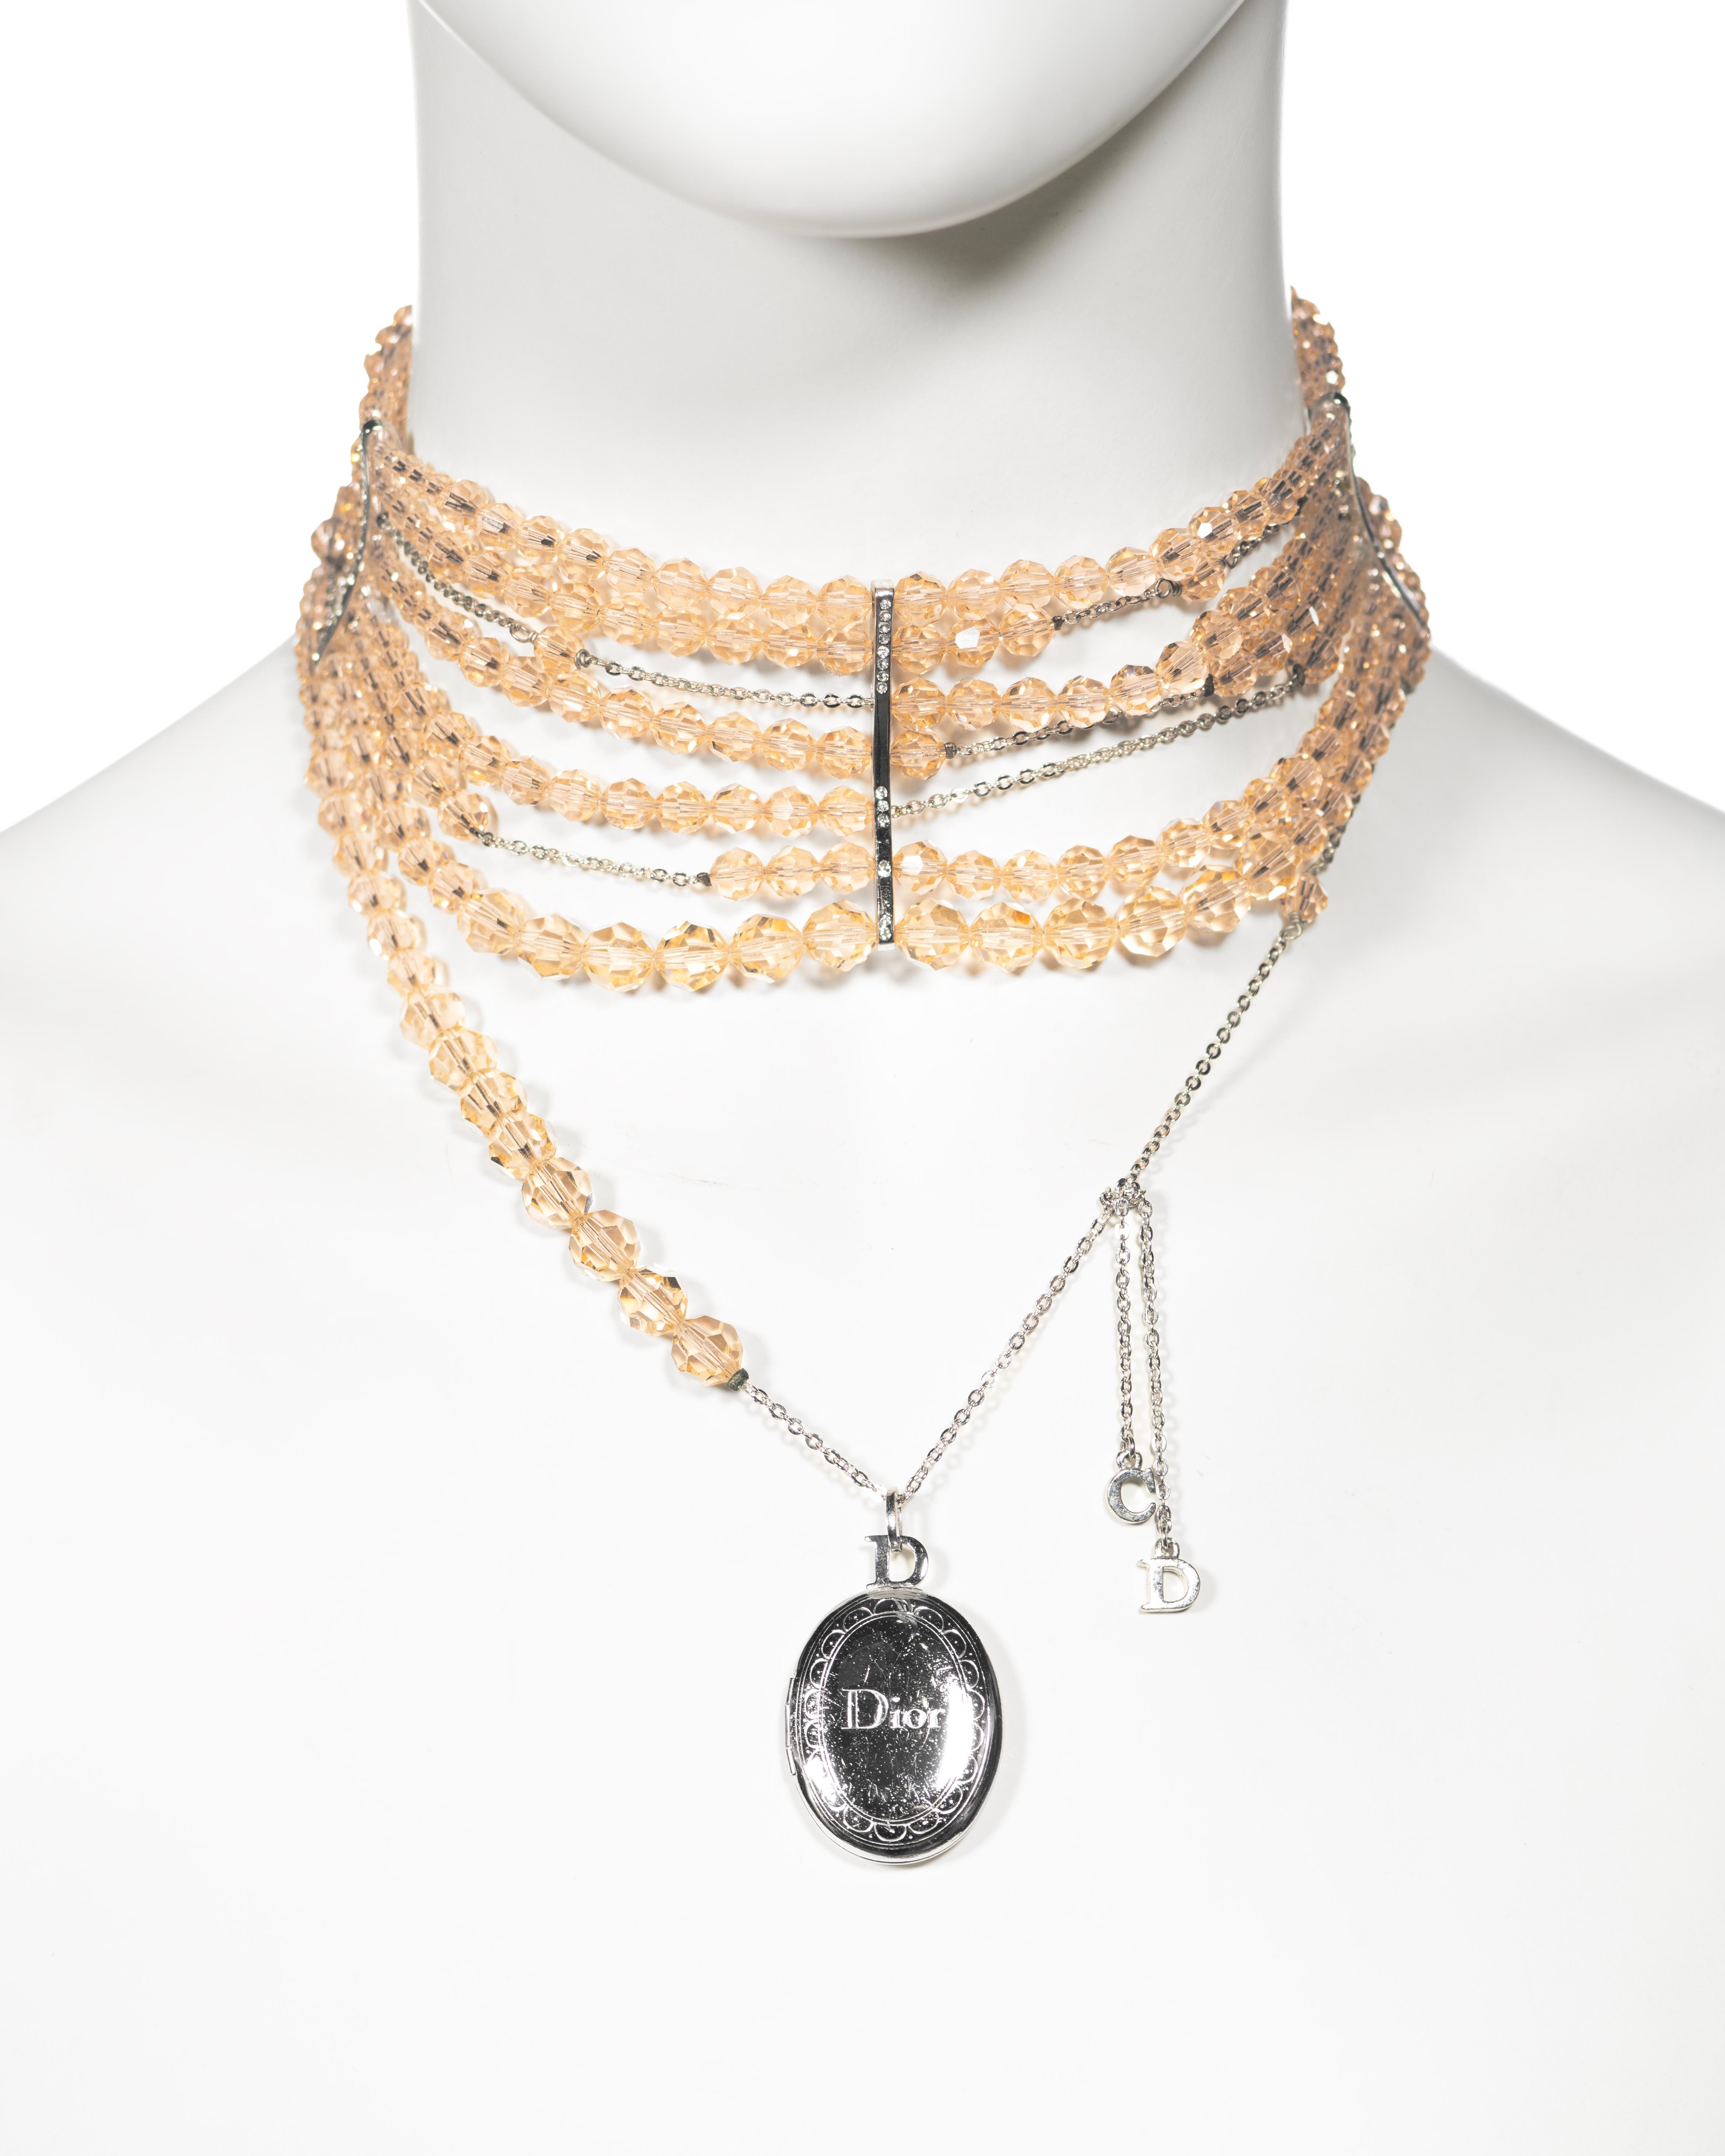 Christian Dior by John Galliano Distressed Peach Bead Choker Necklace, c. 2004 For Sale 1